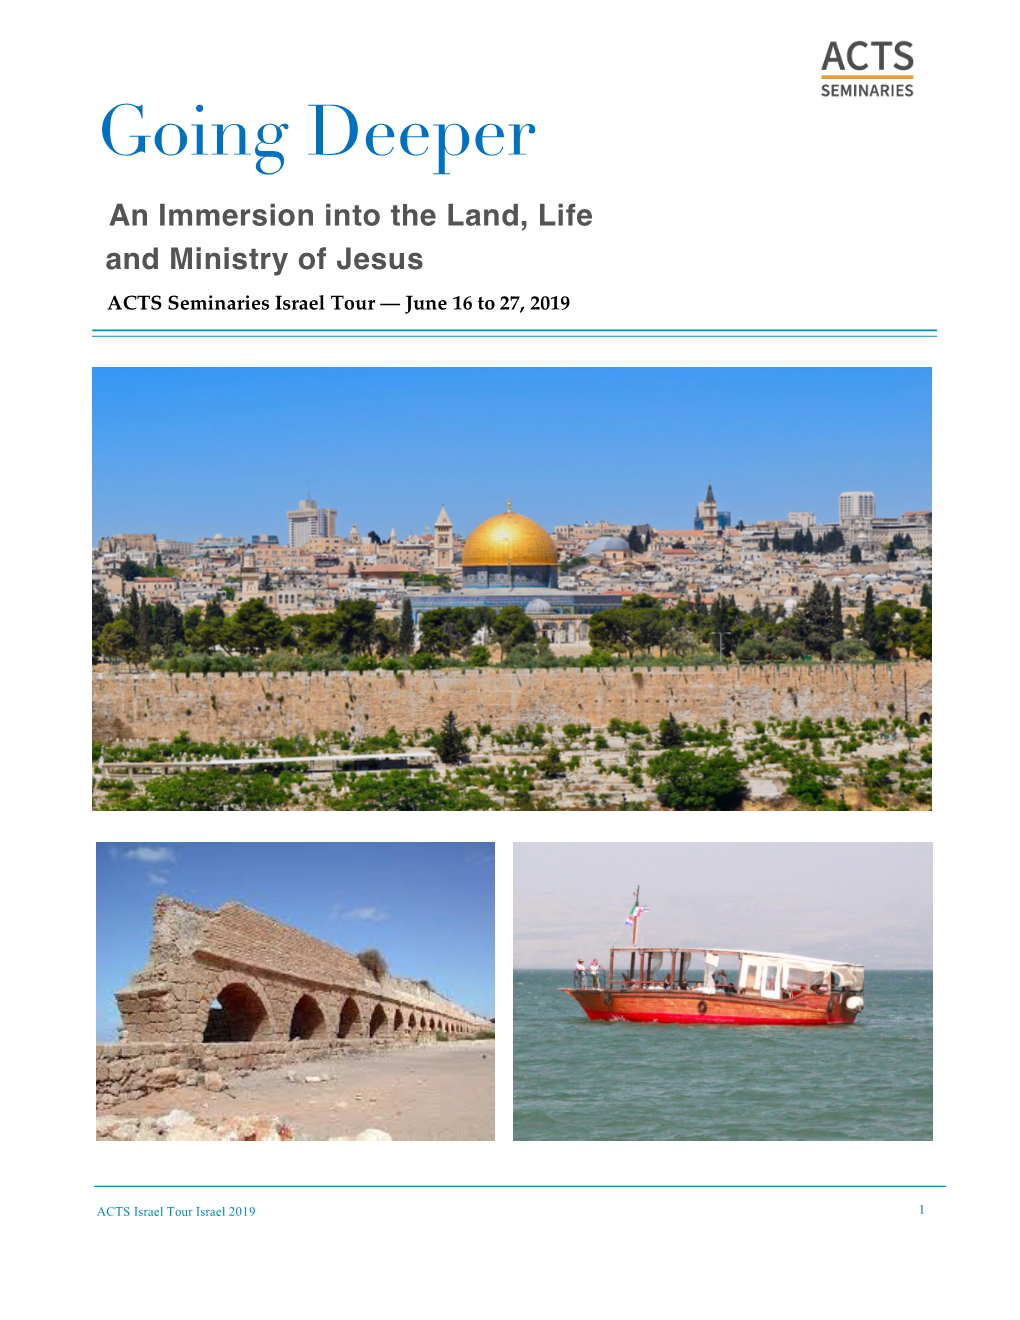 Going Deeper an Immersion Into the Land, Life and Ministry of Jesus ACTS Seminaries Israel Tour — June 16 to 27, 2019